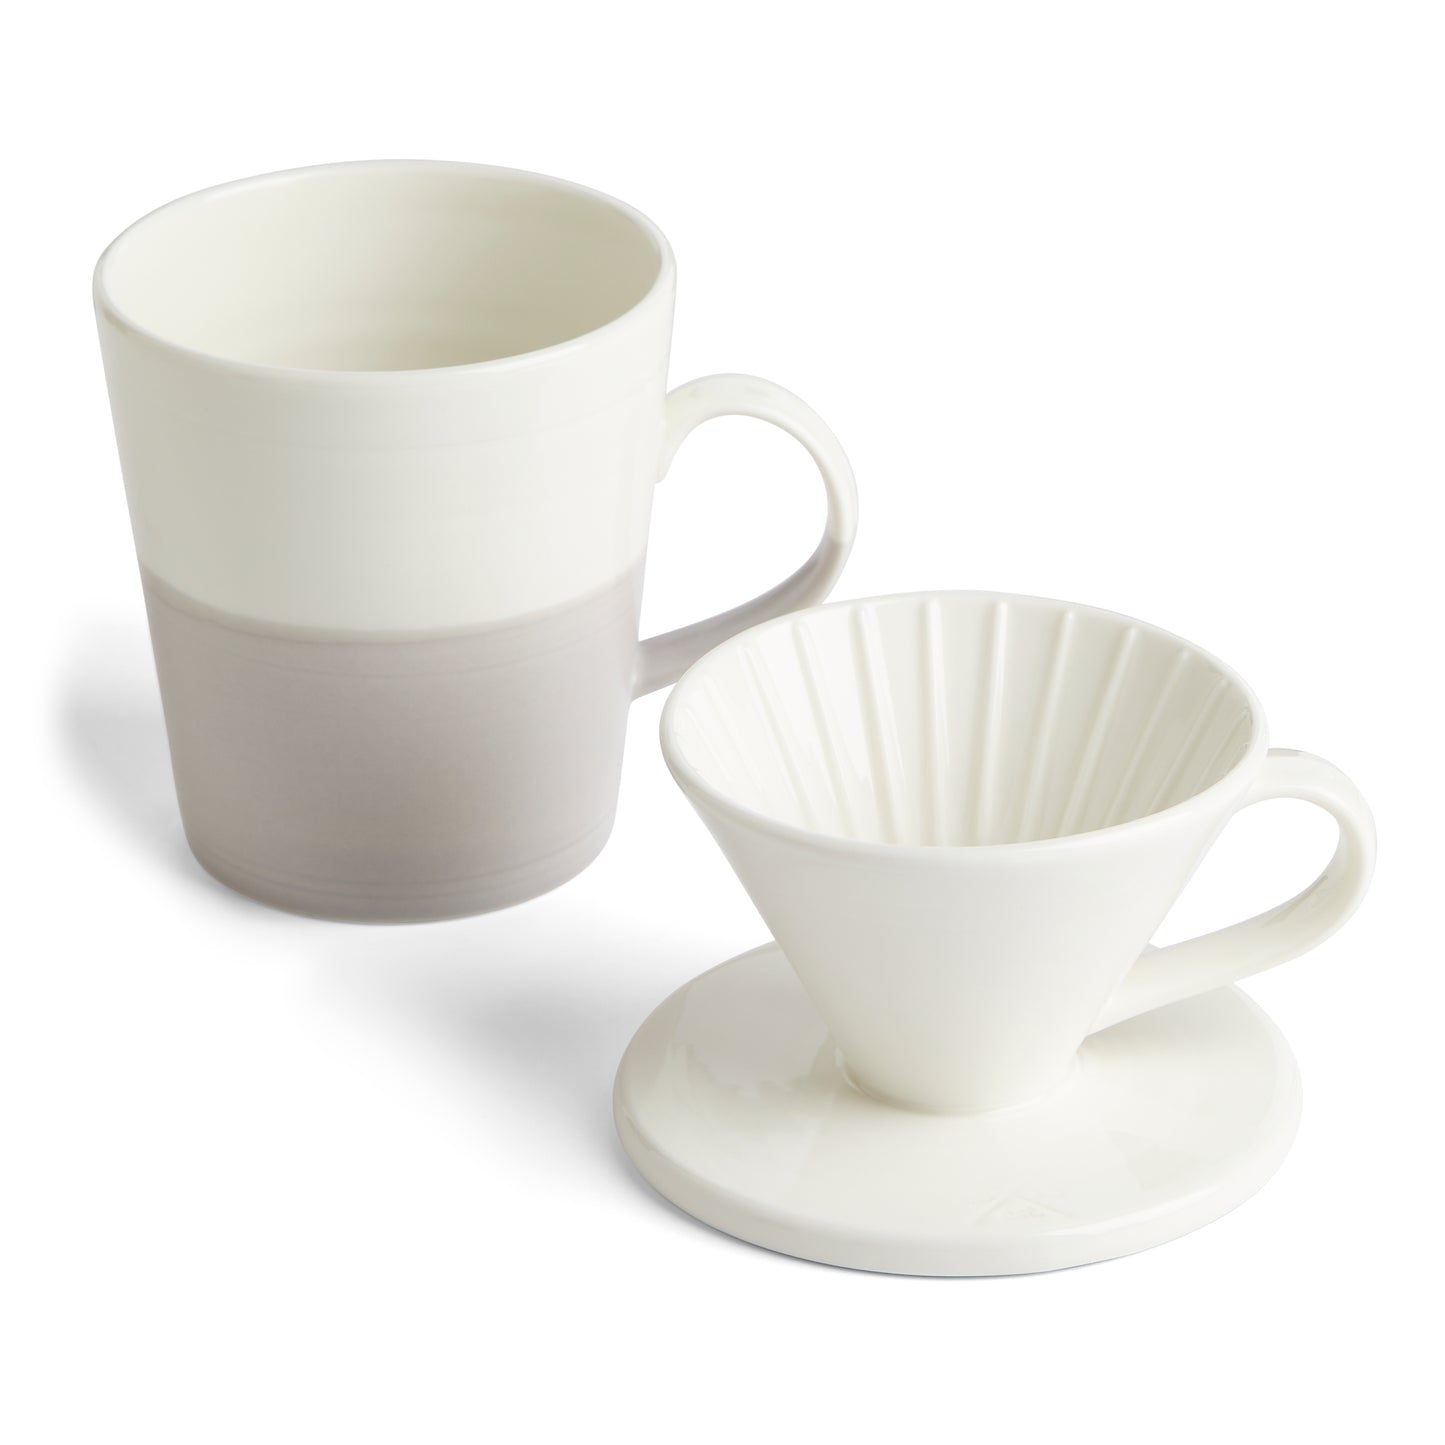 Coffee Studio Espresso Cups and Saucers, 4-pack - Royal Doulton